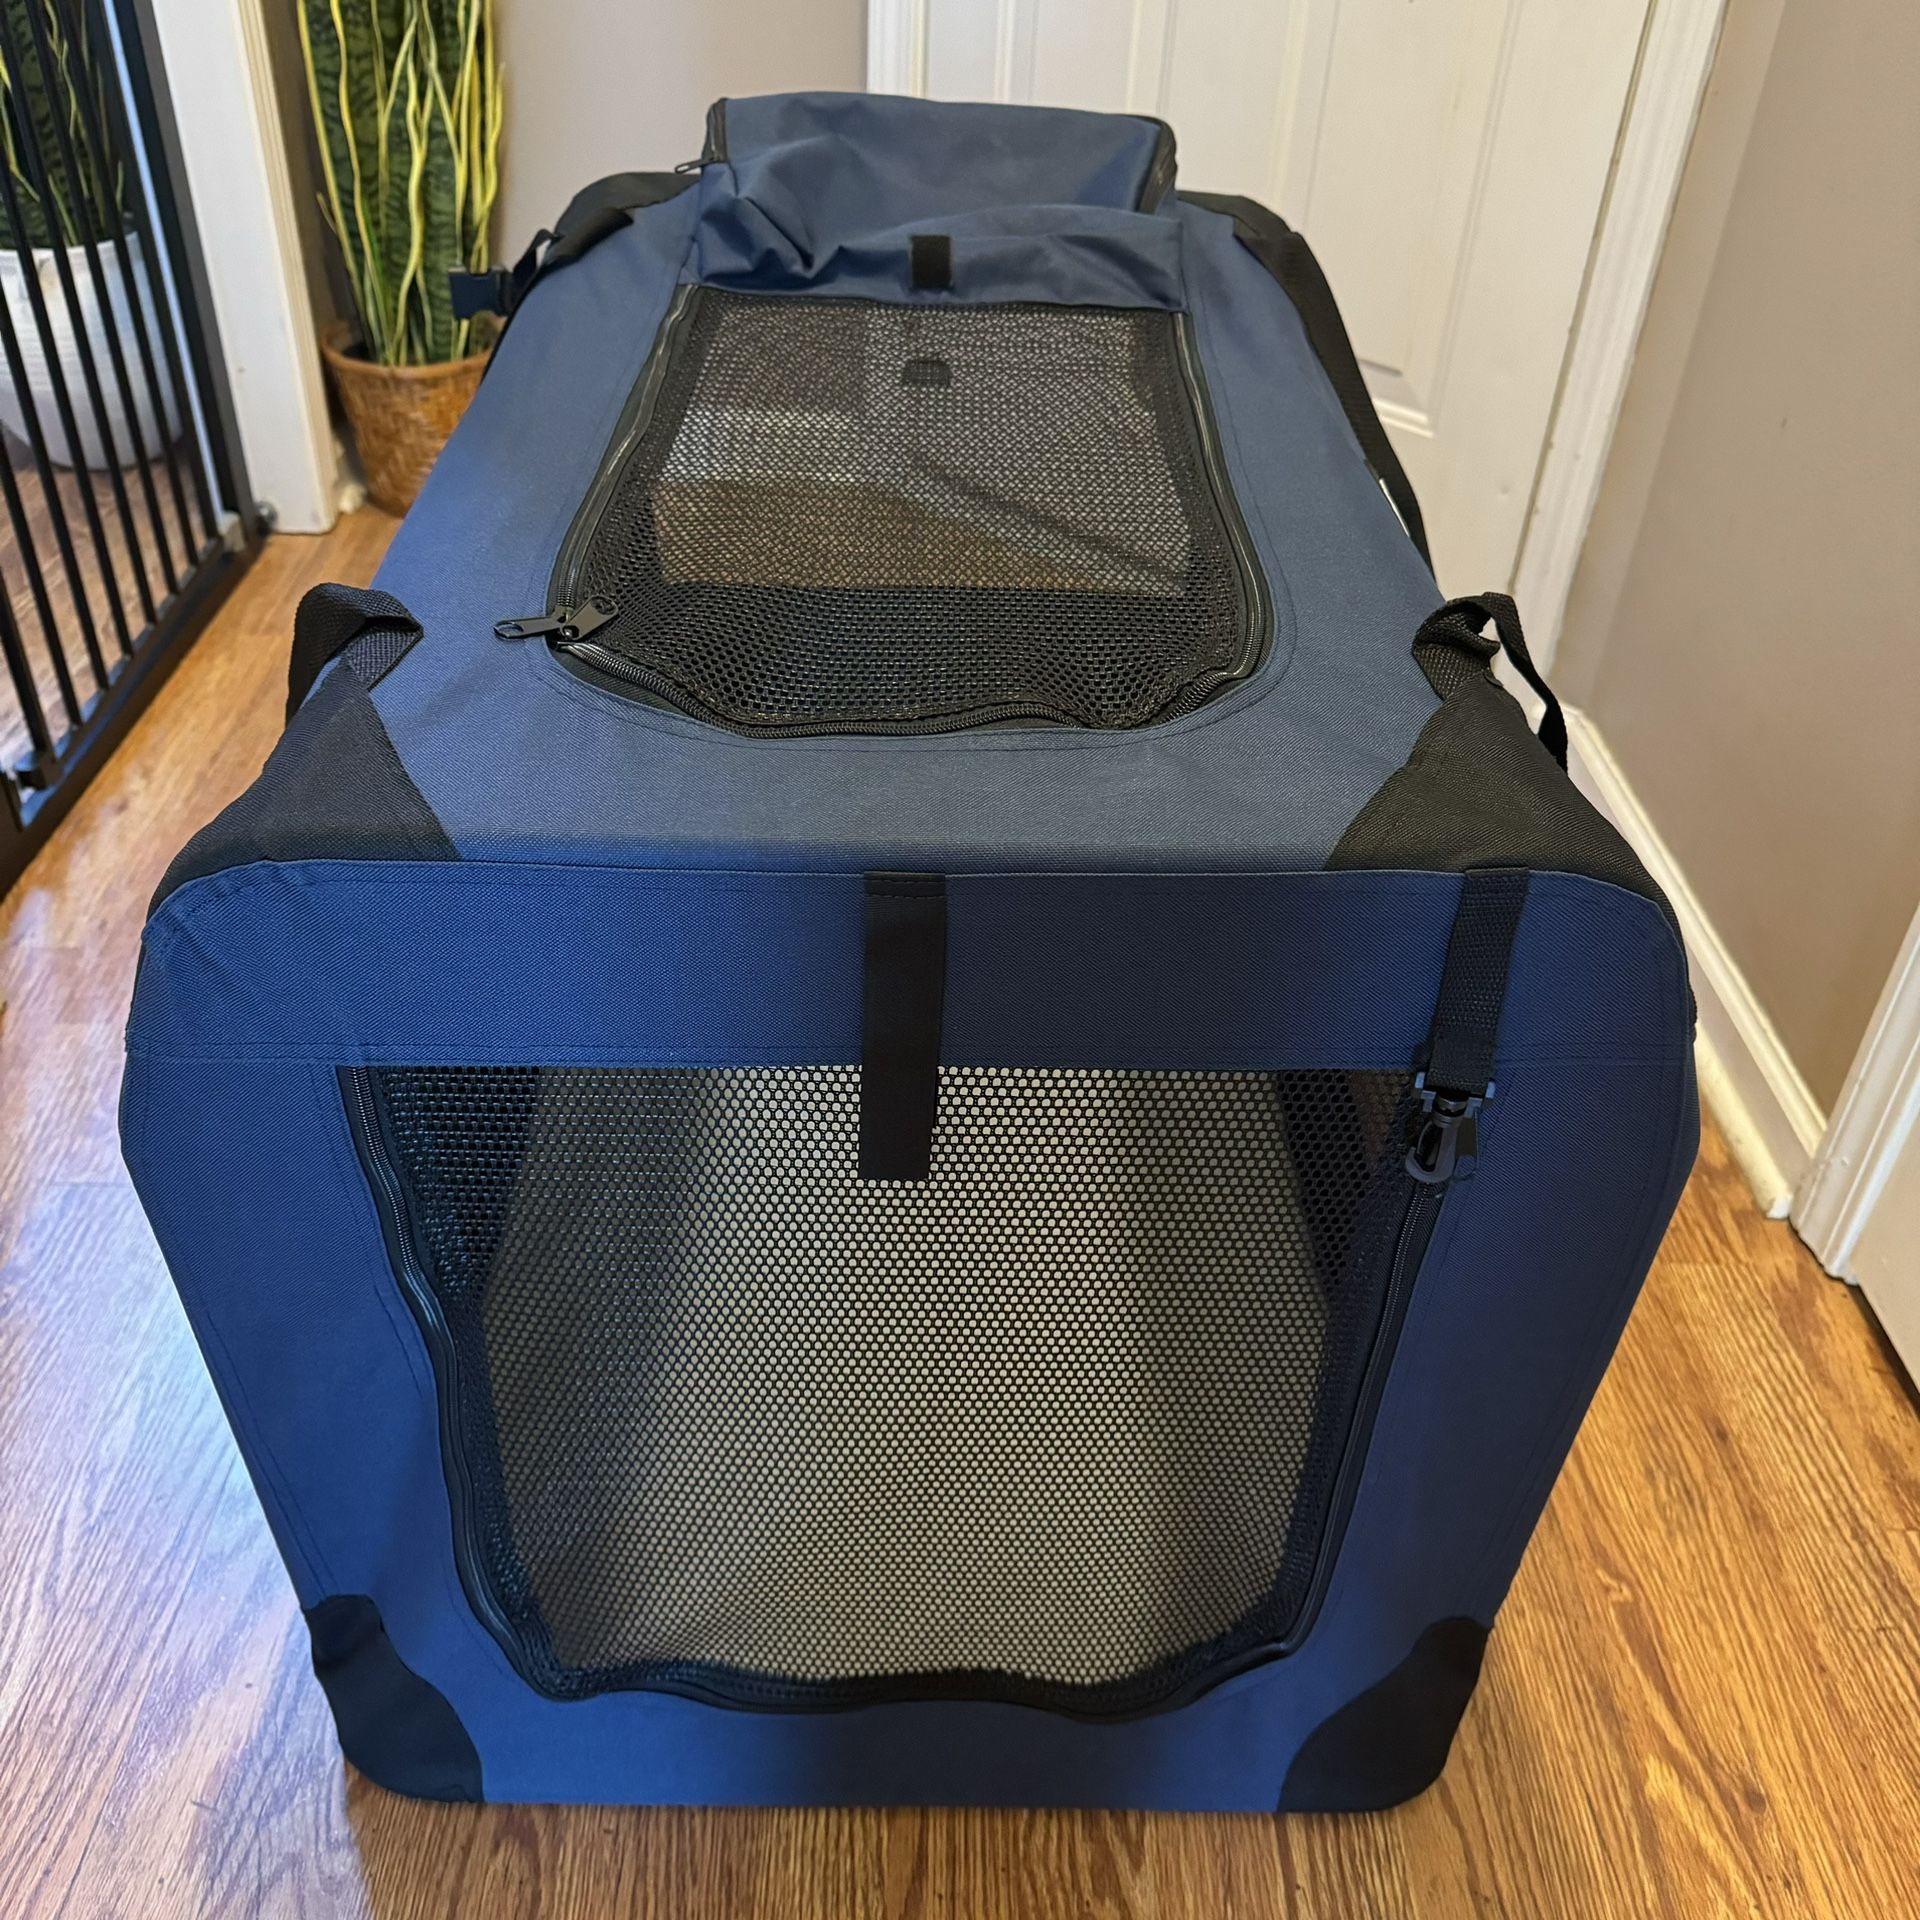 NEW Portable 32" Soft Foldable 4-Door Dog Crate - Pet Travel Kennel - Car Seat Carrier - $80 Retail